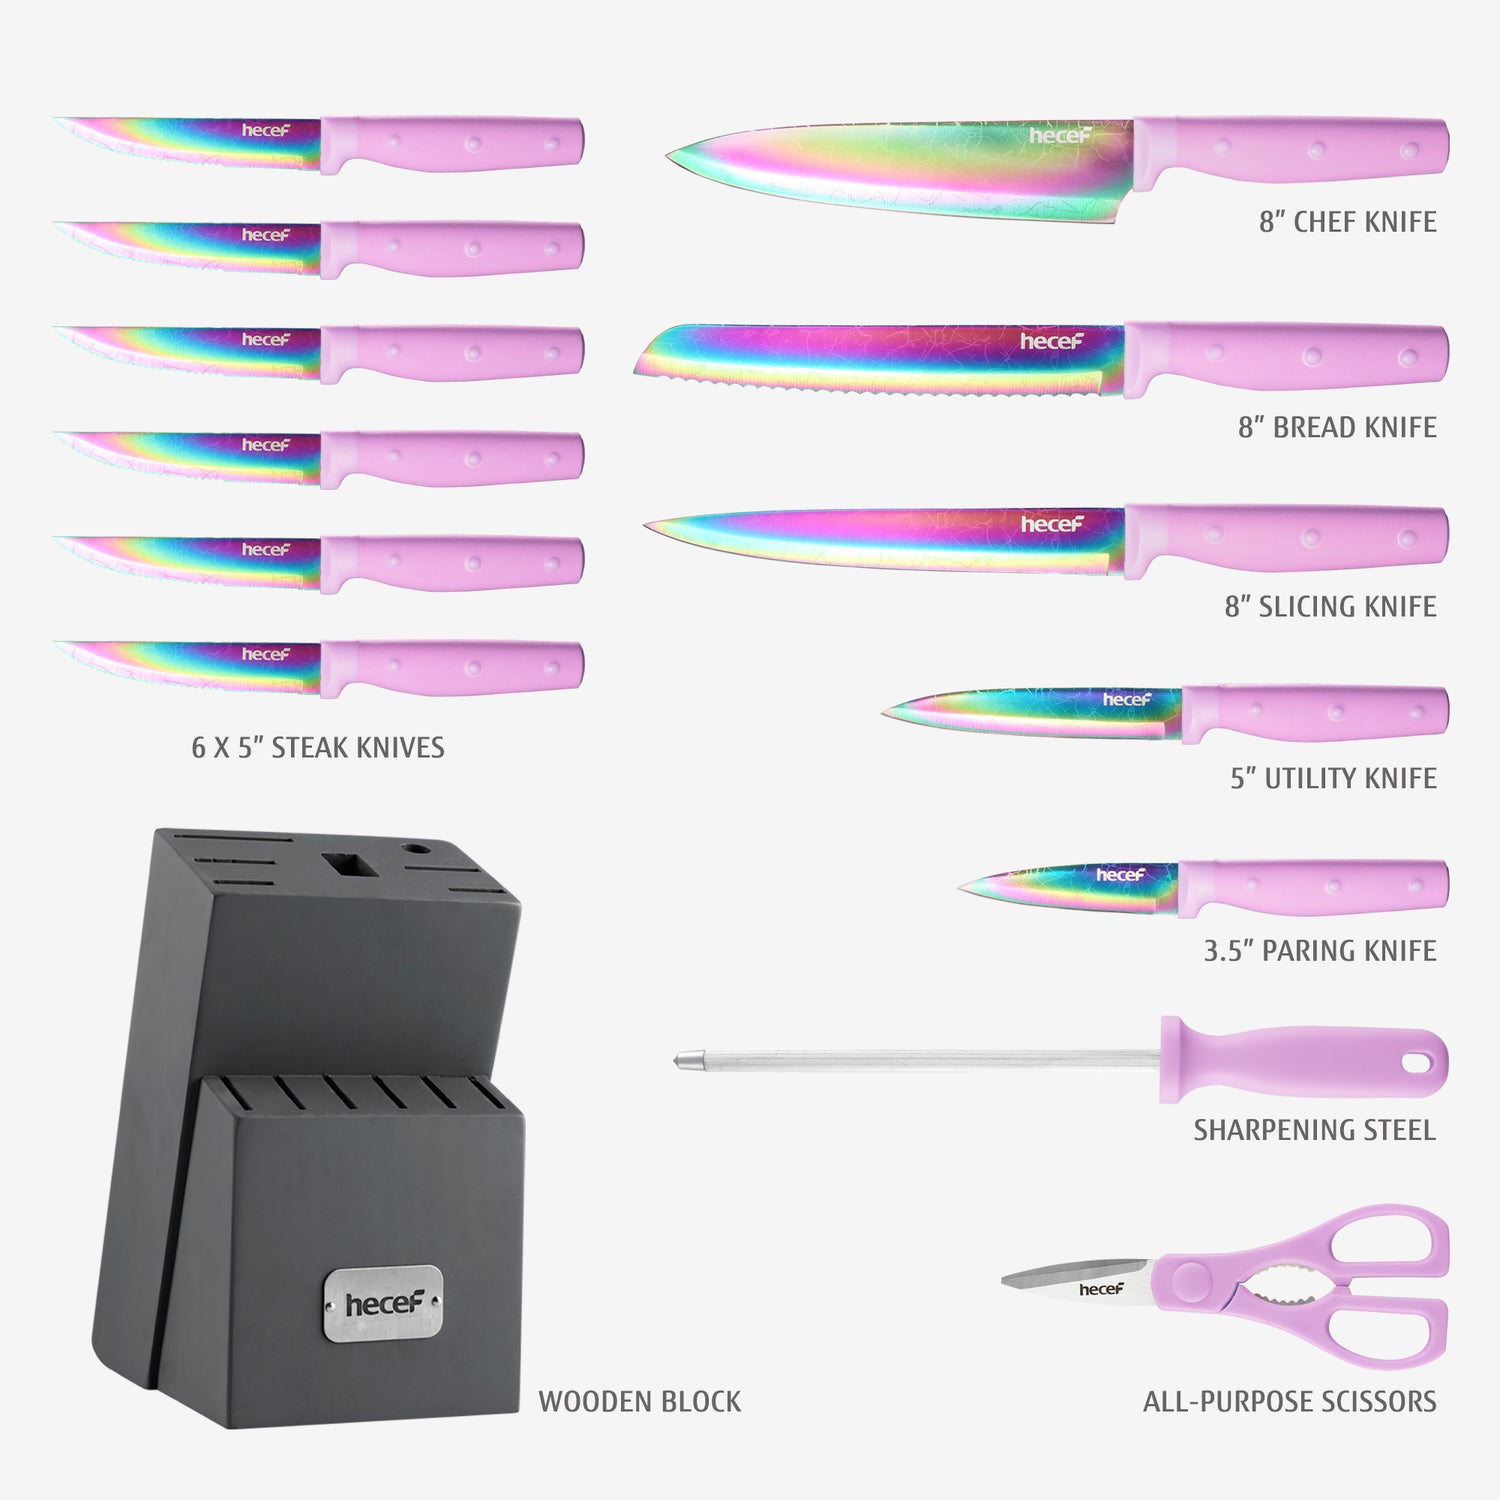 HAUSHOF Kitchen Knife Set, 5 Piece Rainbow Knife Sets with Block, Titanium  Coated Starter Knives Set for Kitchen with Ergonomic Handle, Great for  Slicing, Dicing&Cutting 